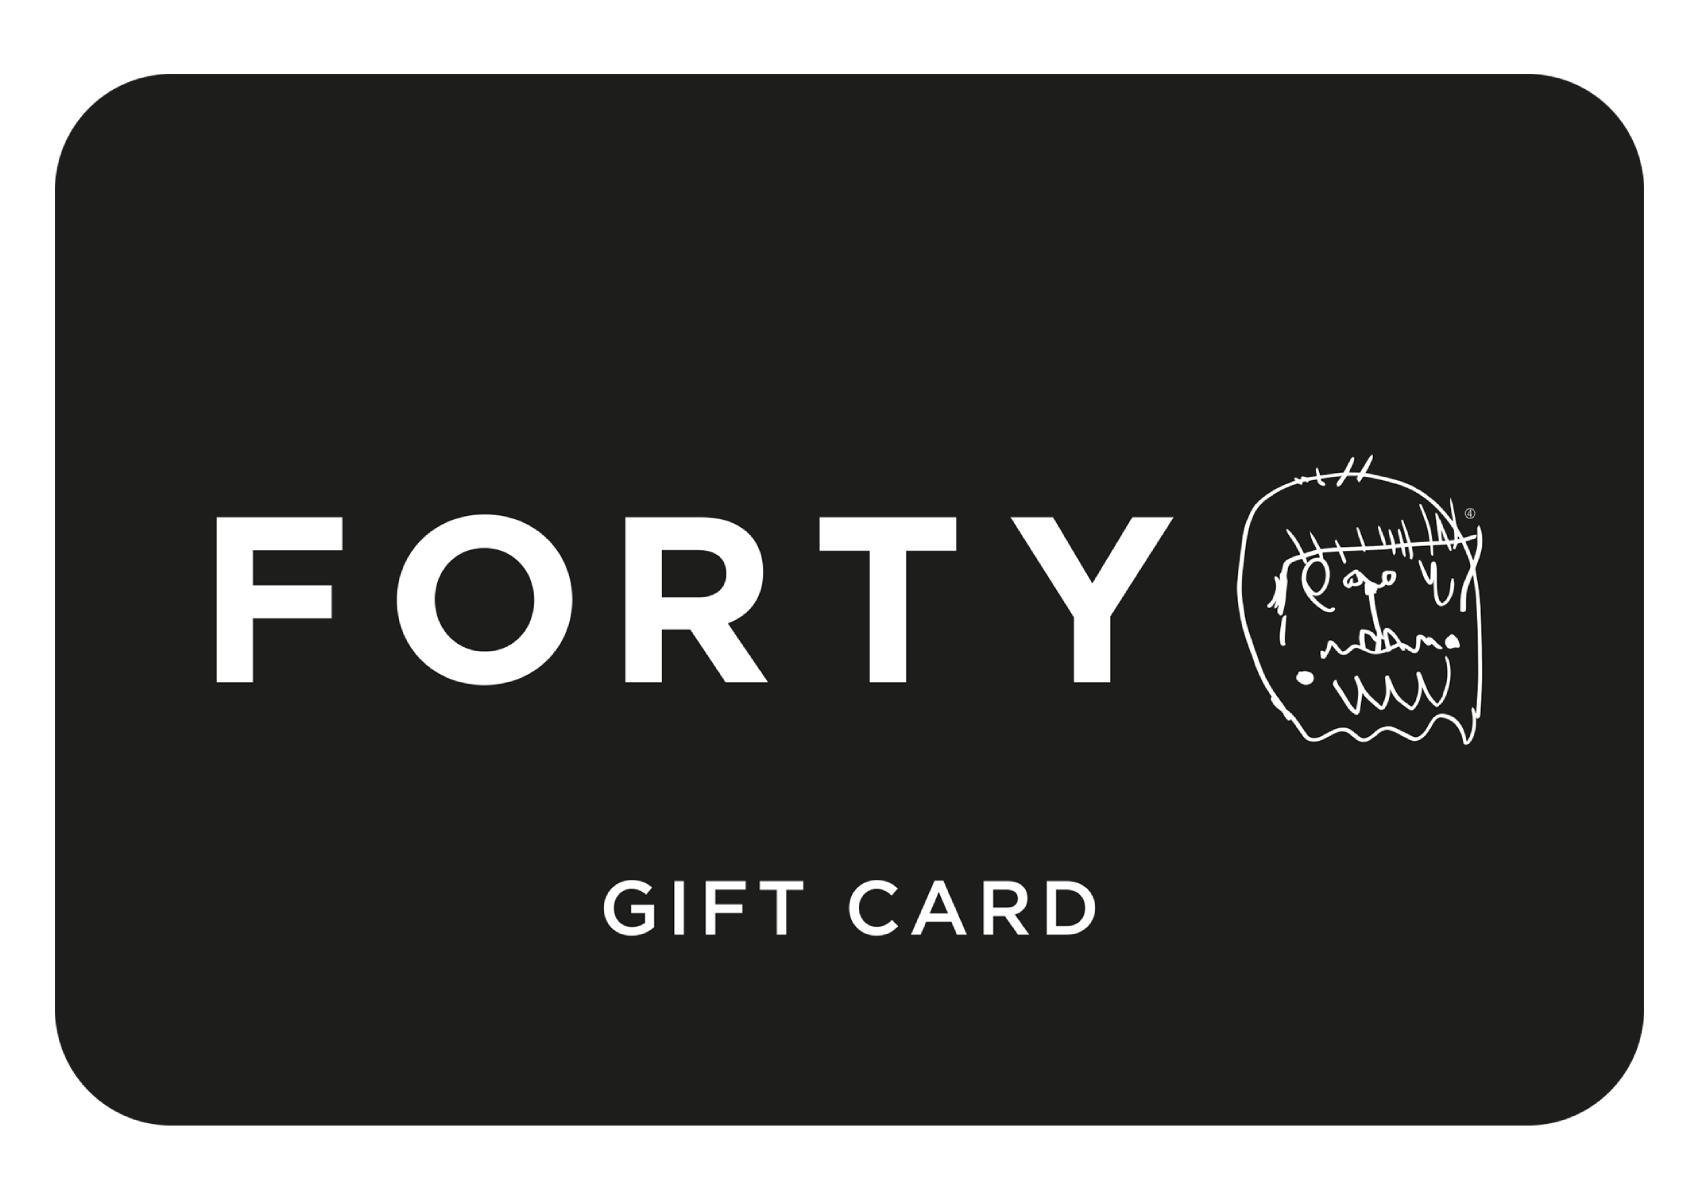 Forty E-Gift Card xccscss.